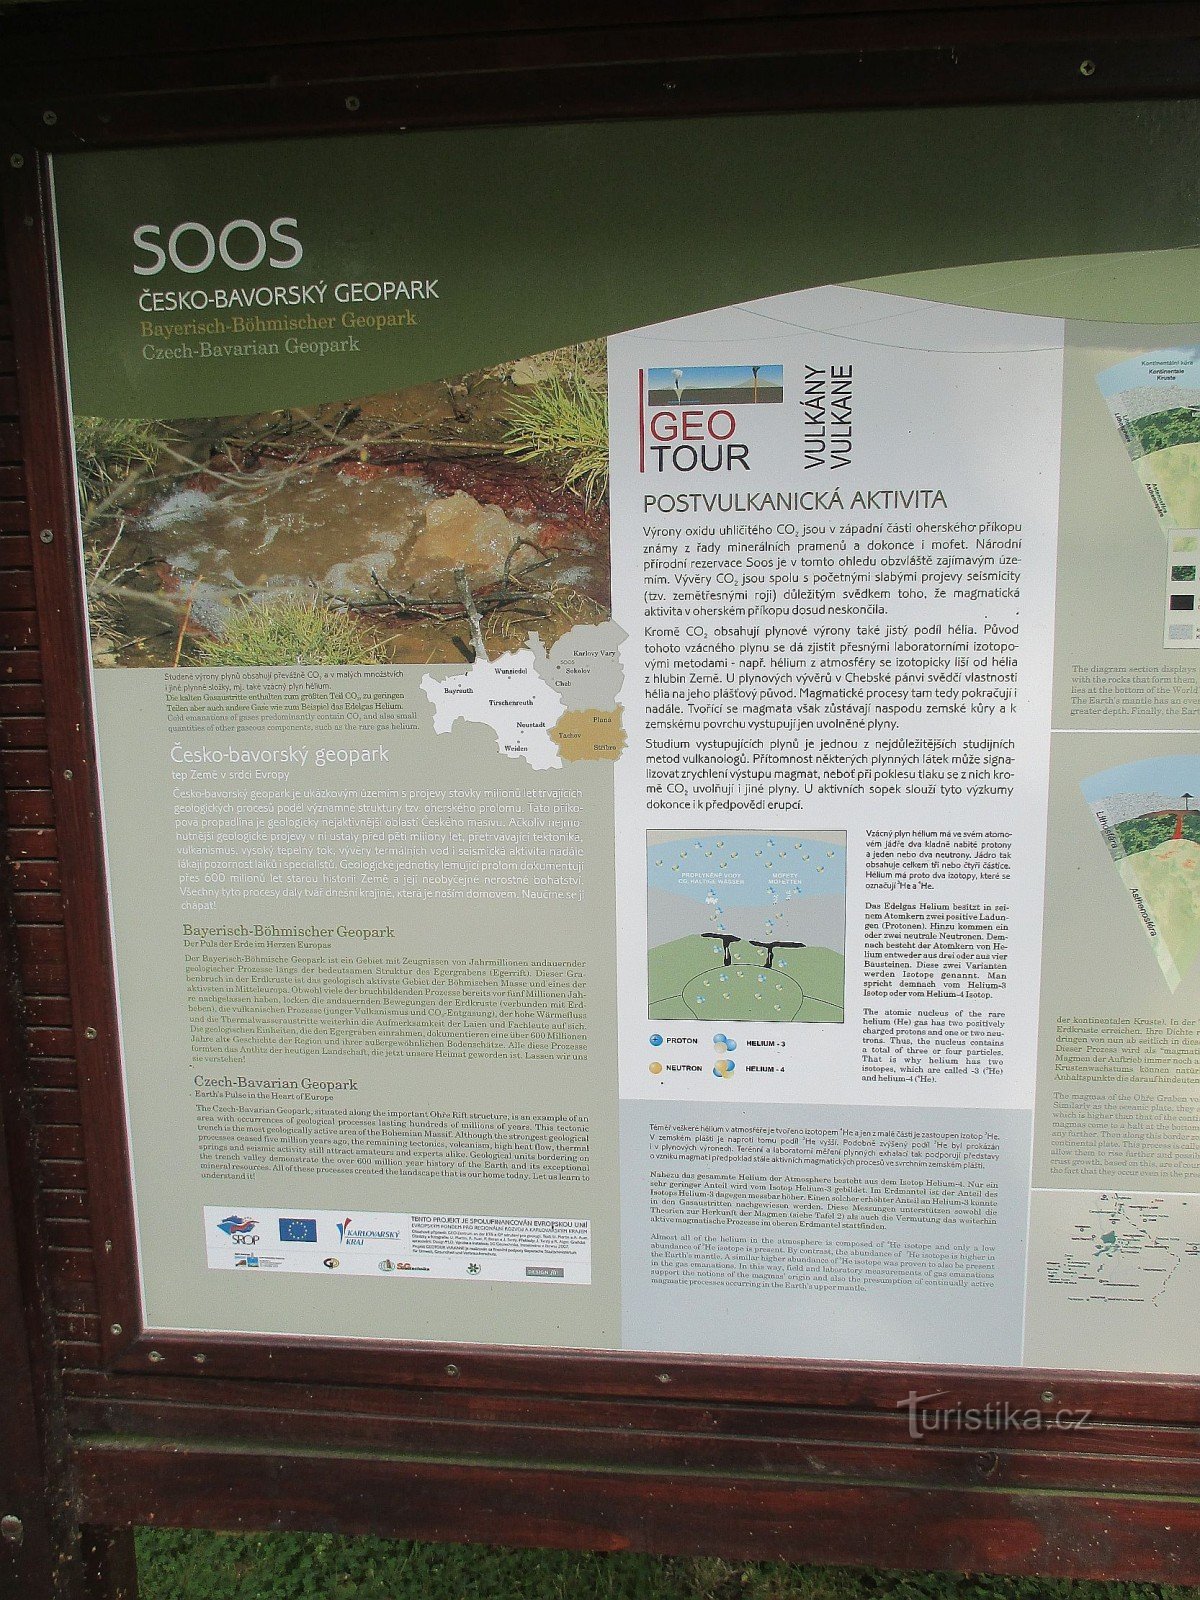 Educational trail of the SOOS National Nature Reserve